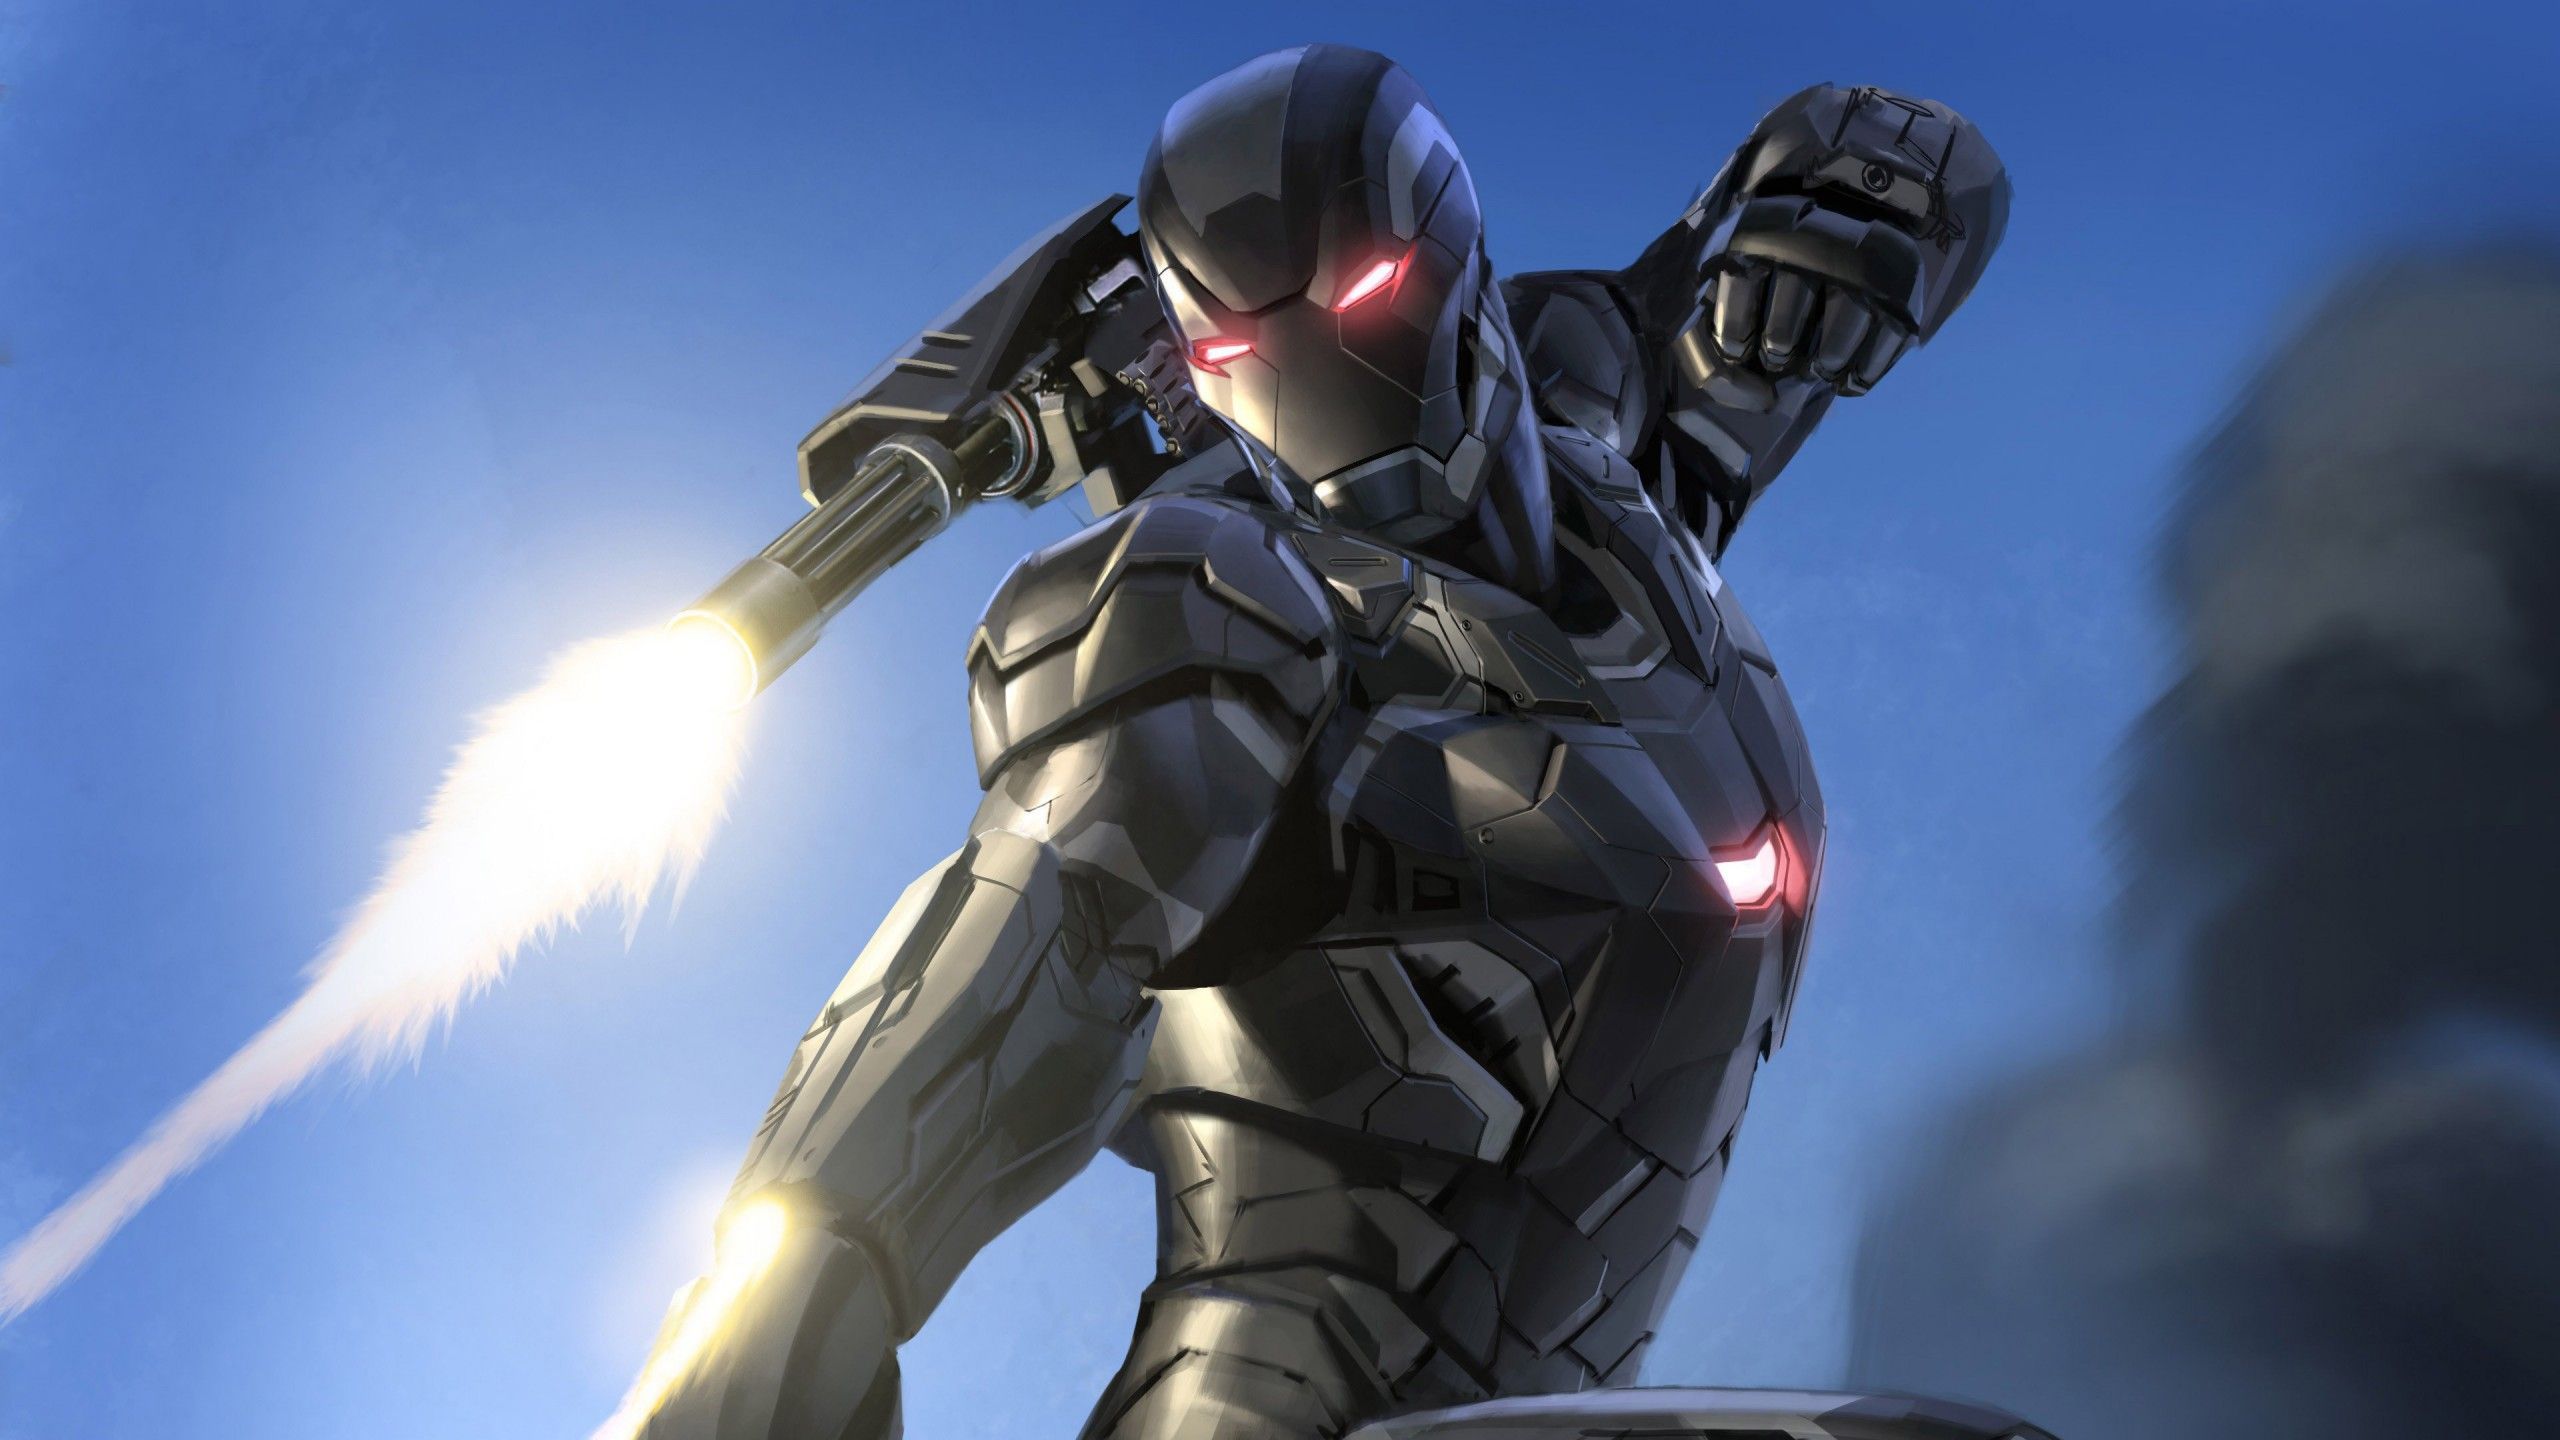 Wallpaper War Machine, 4K, Movies,. Wallpaper for iPhone, Android, Mobile and Desktop